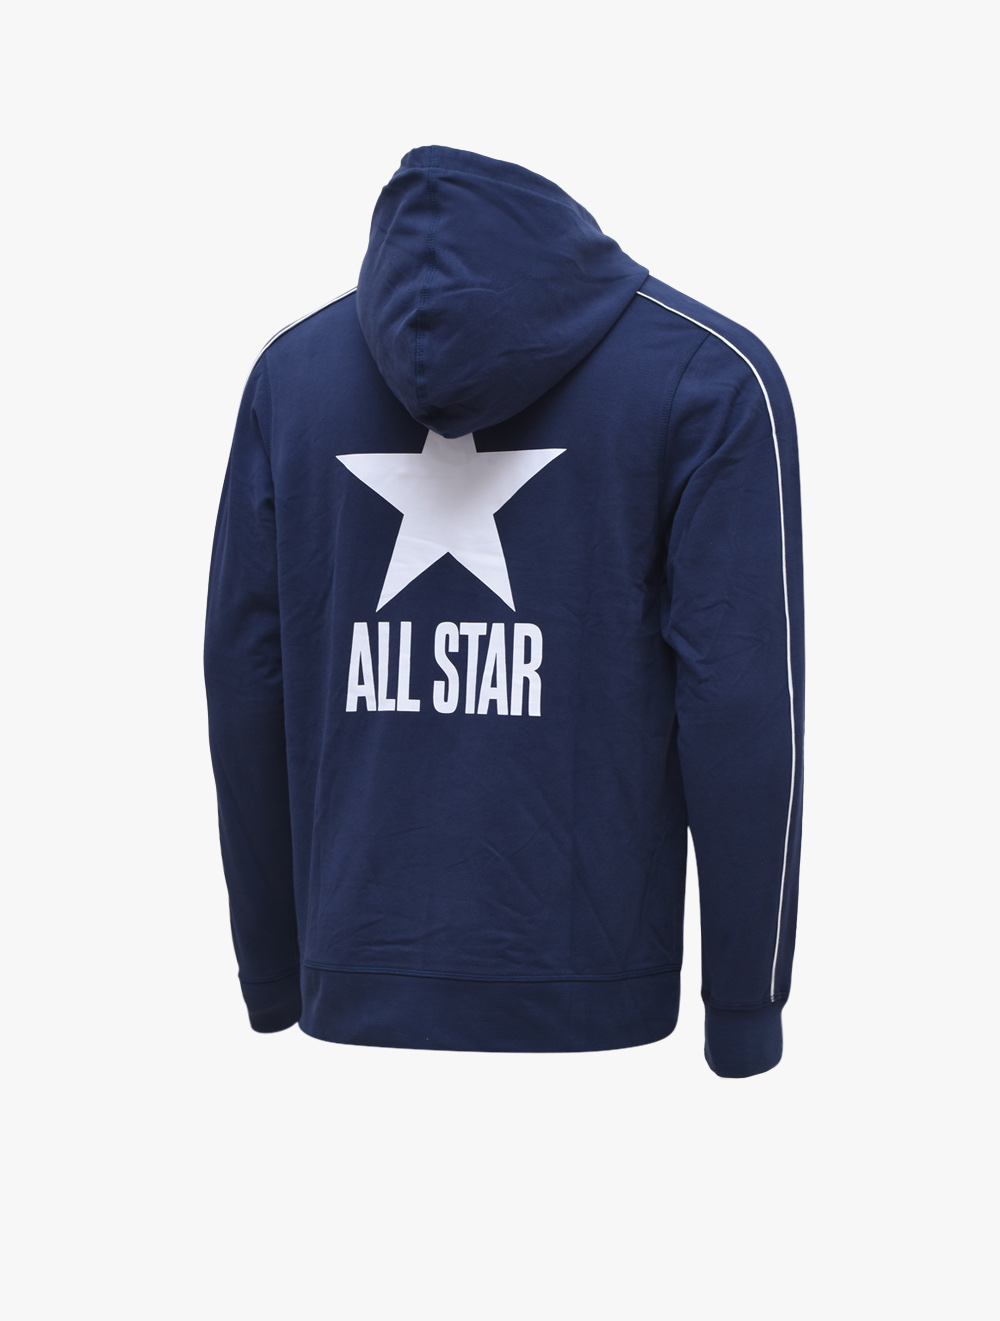 converse all star sweater